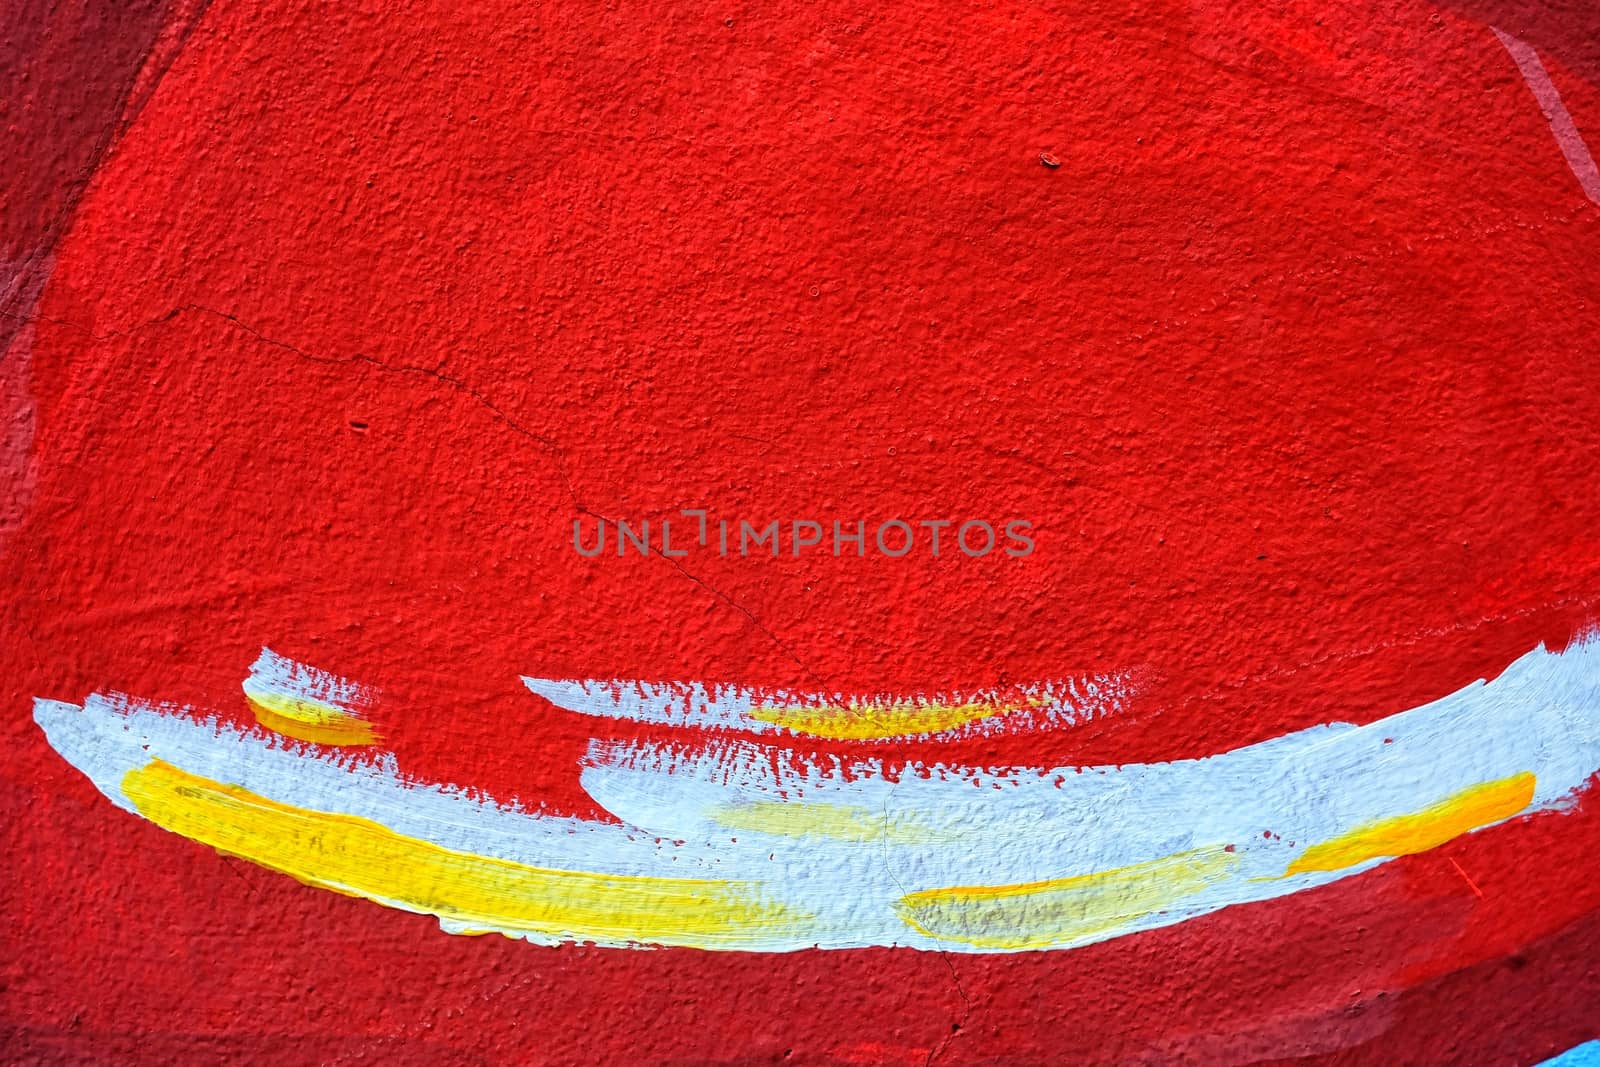 Unfinished Painted on Concrete Wall. by mesamong